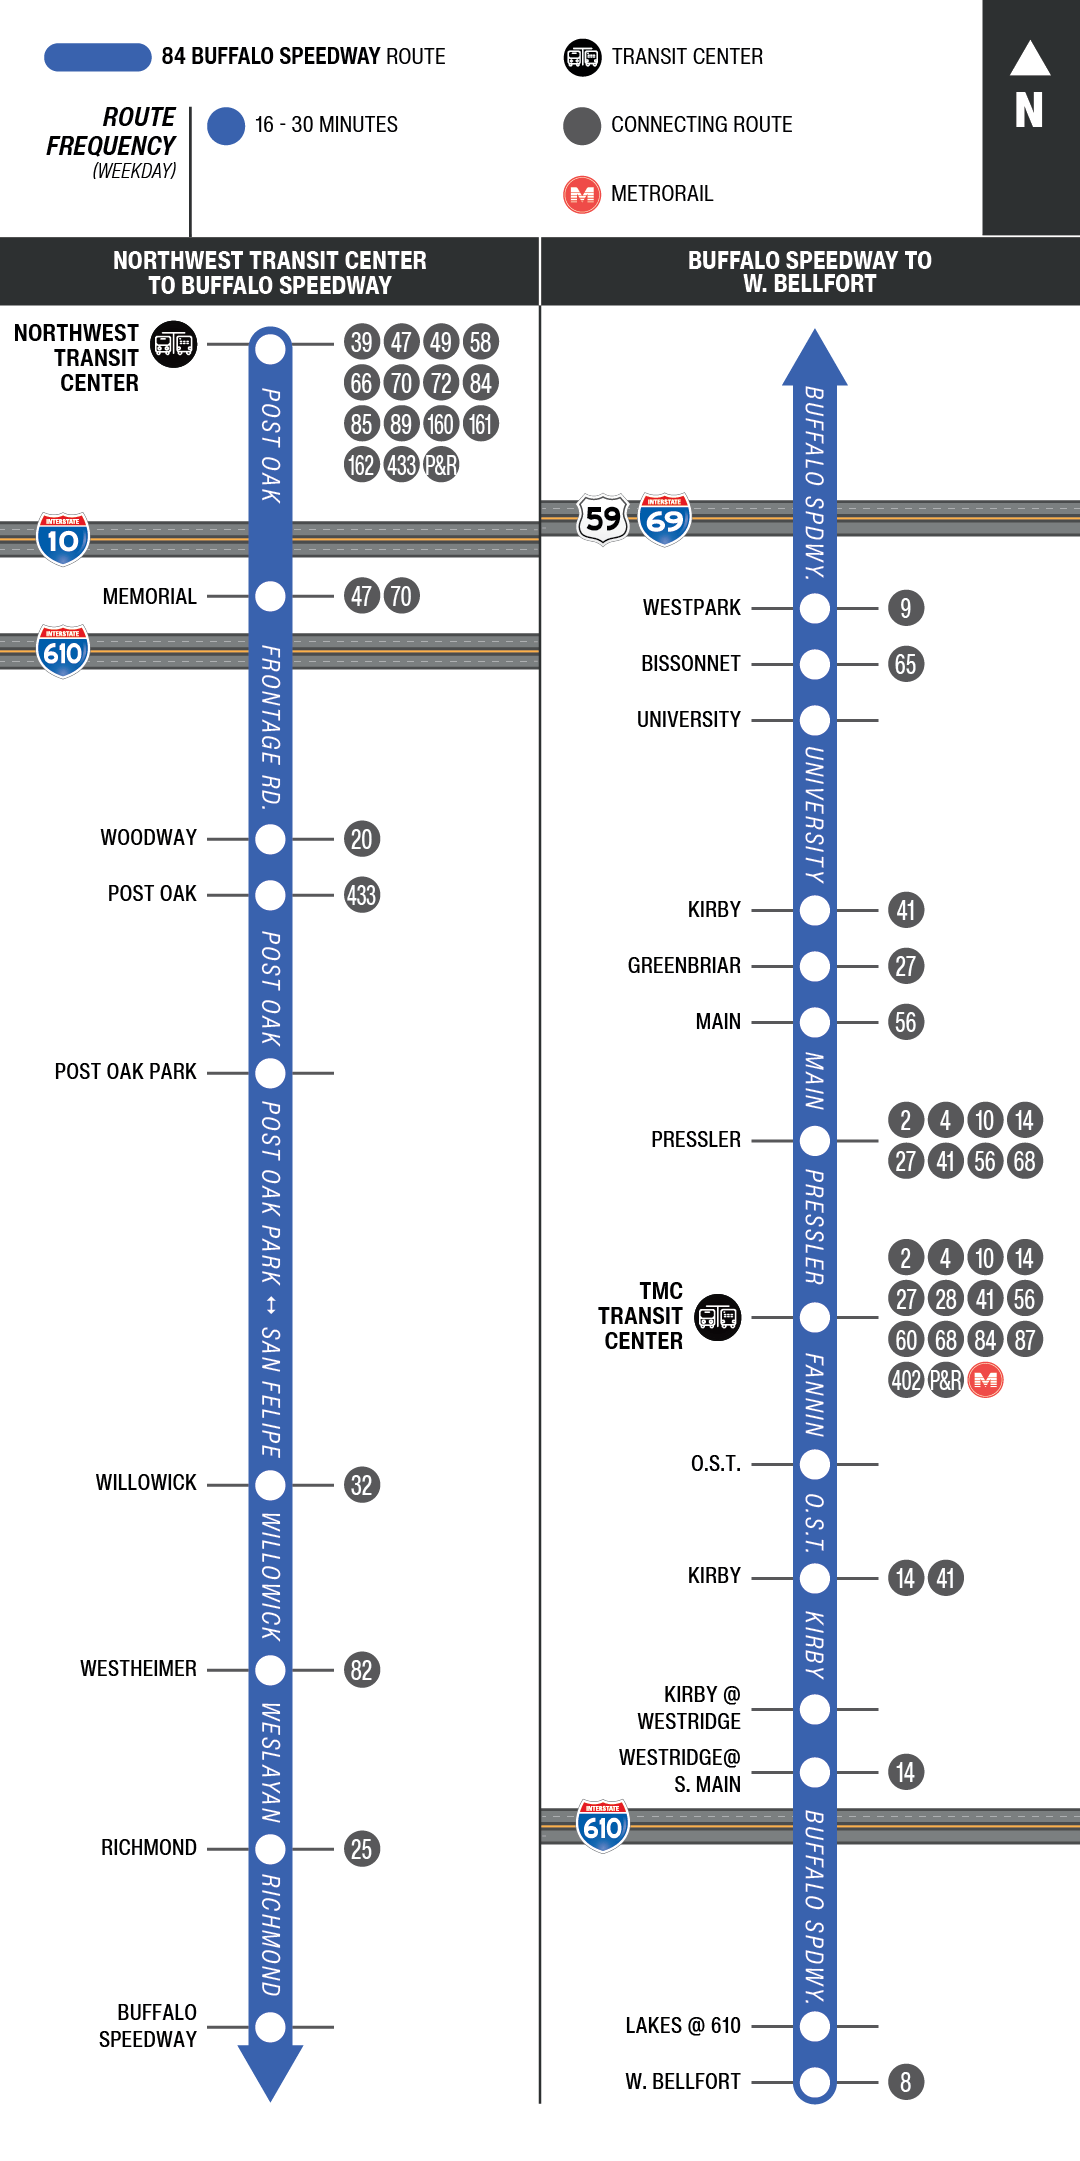 Route map for 84 Buffalo Speedway bus